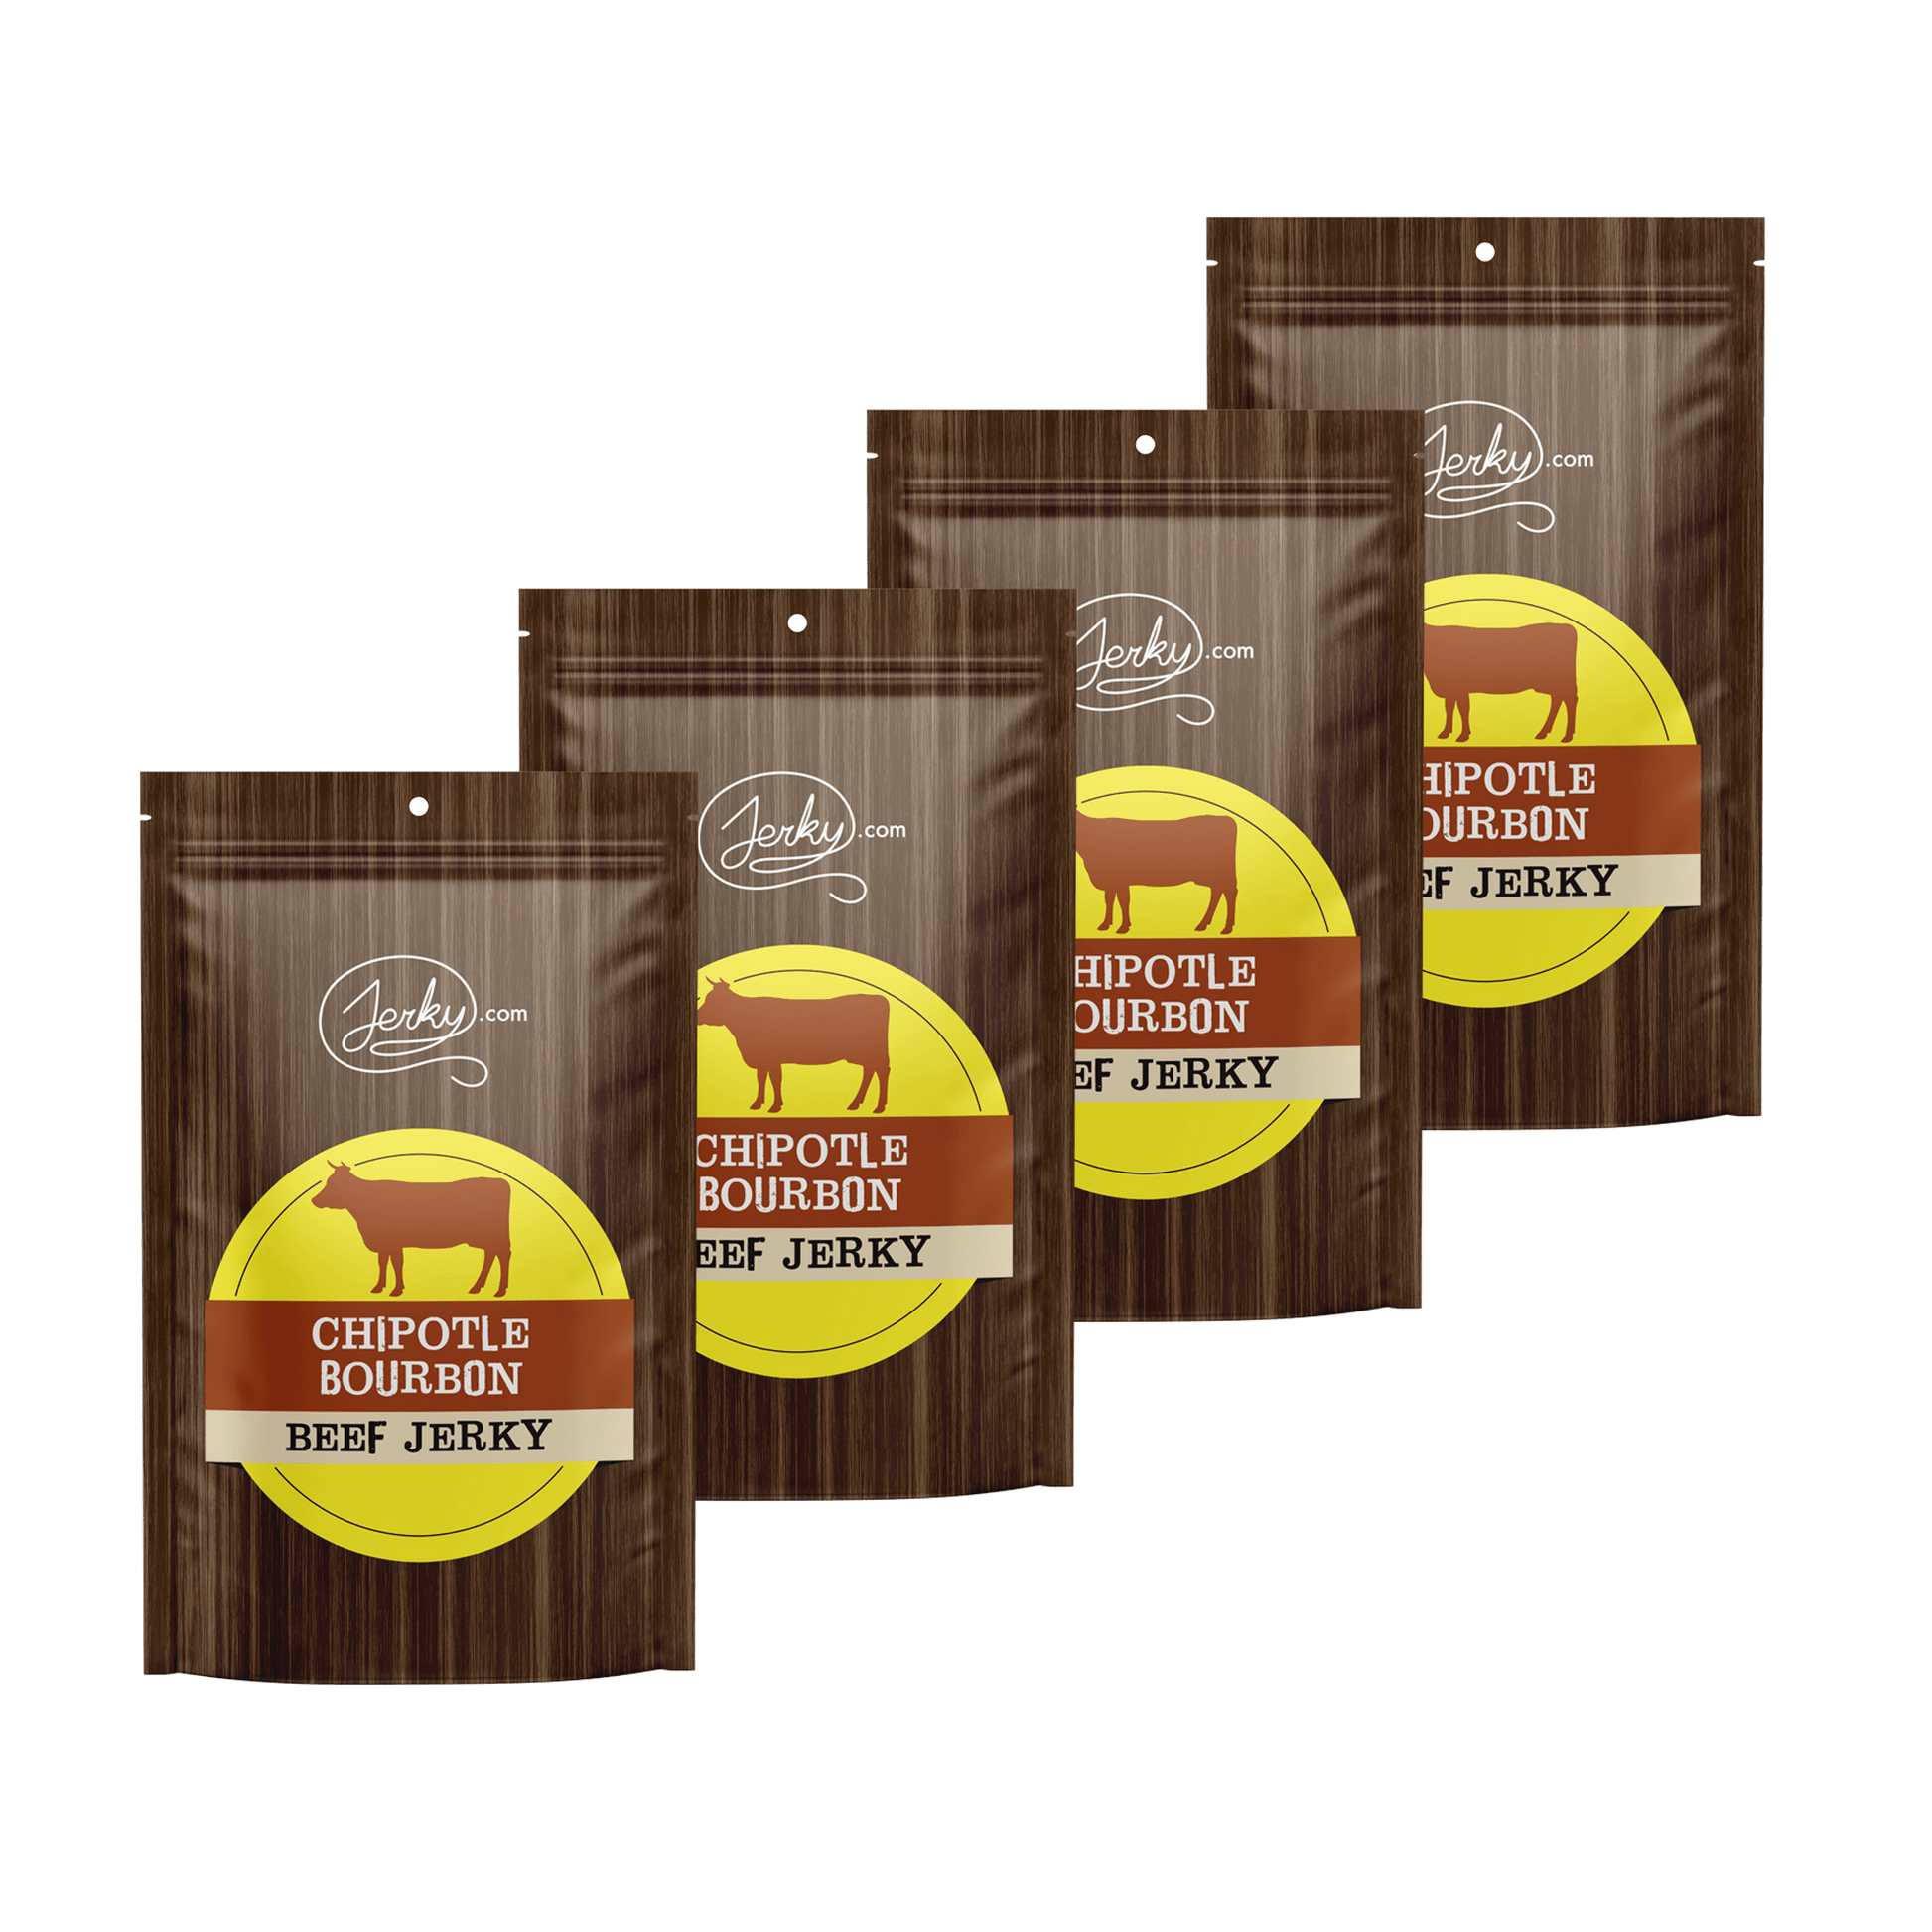 All-Natural Beef Jerky - Chipotle Bourbon by Jerky.com